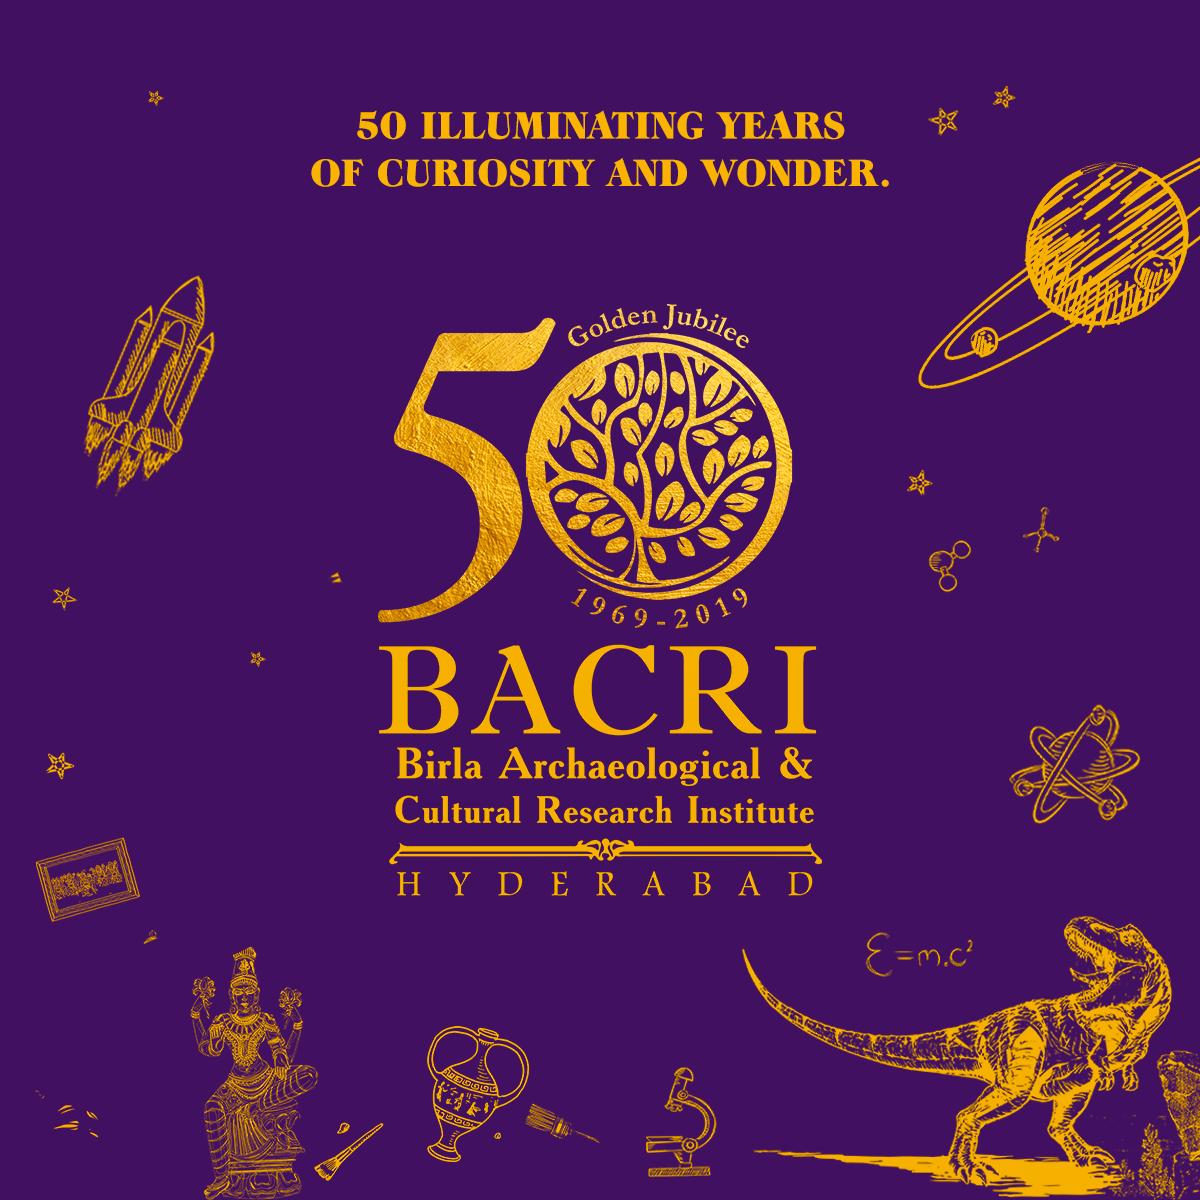 Explore an unseen, never before world. Your journey into a world that's filled with curiosity, wonder and knowledge begins right here at BACRI.
#BACRI #Researchinstitute #Launch #Knowledge #archaeology #Art #Culture